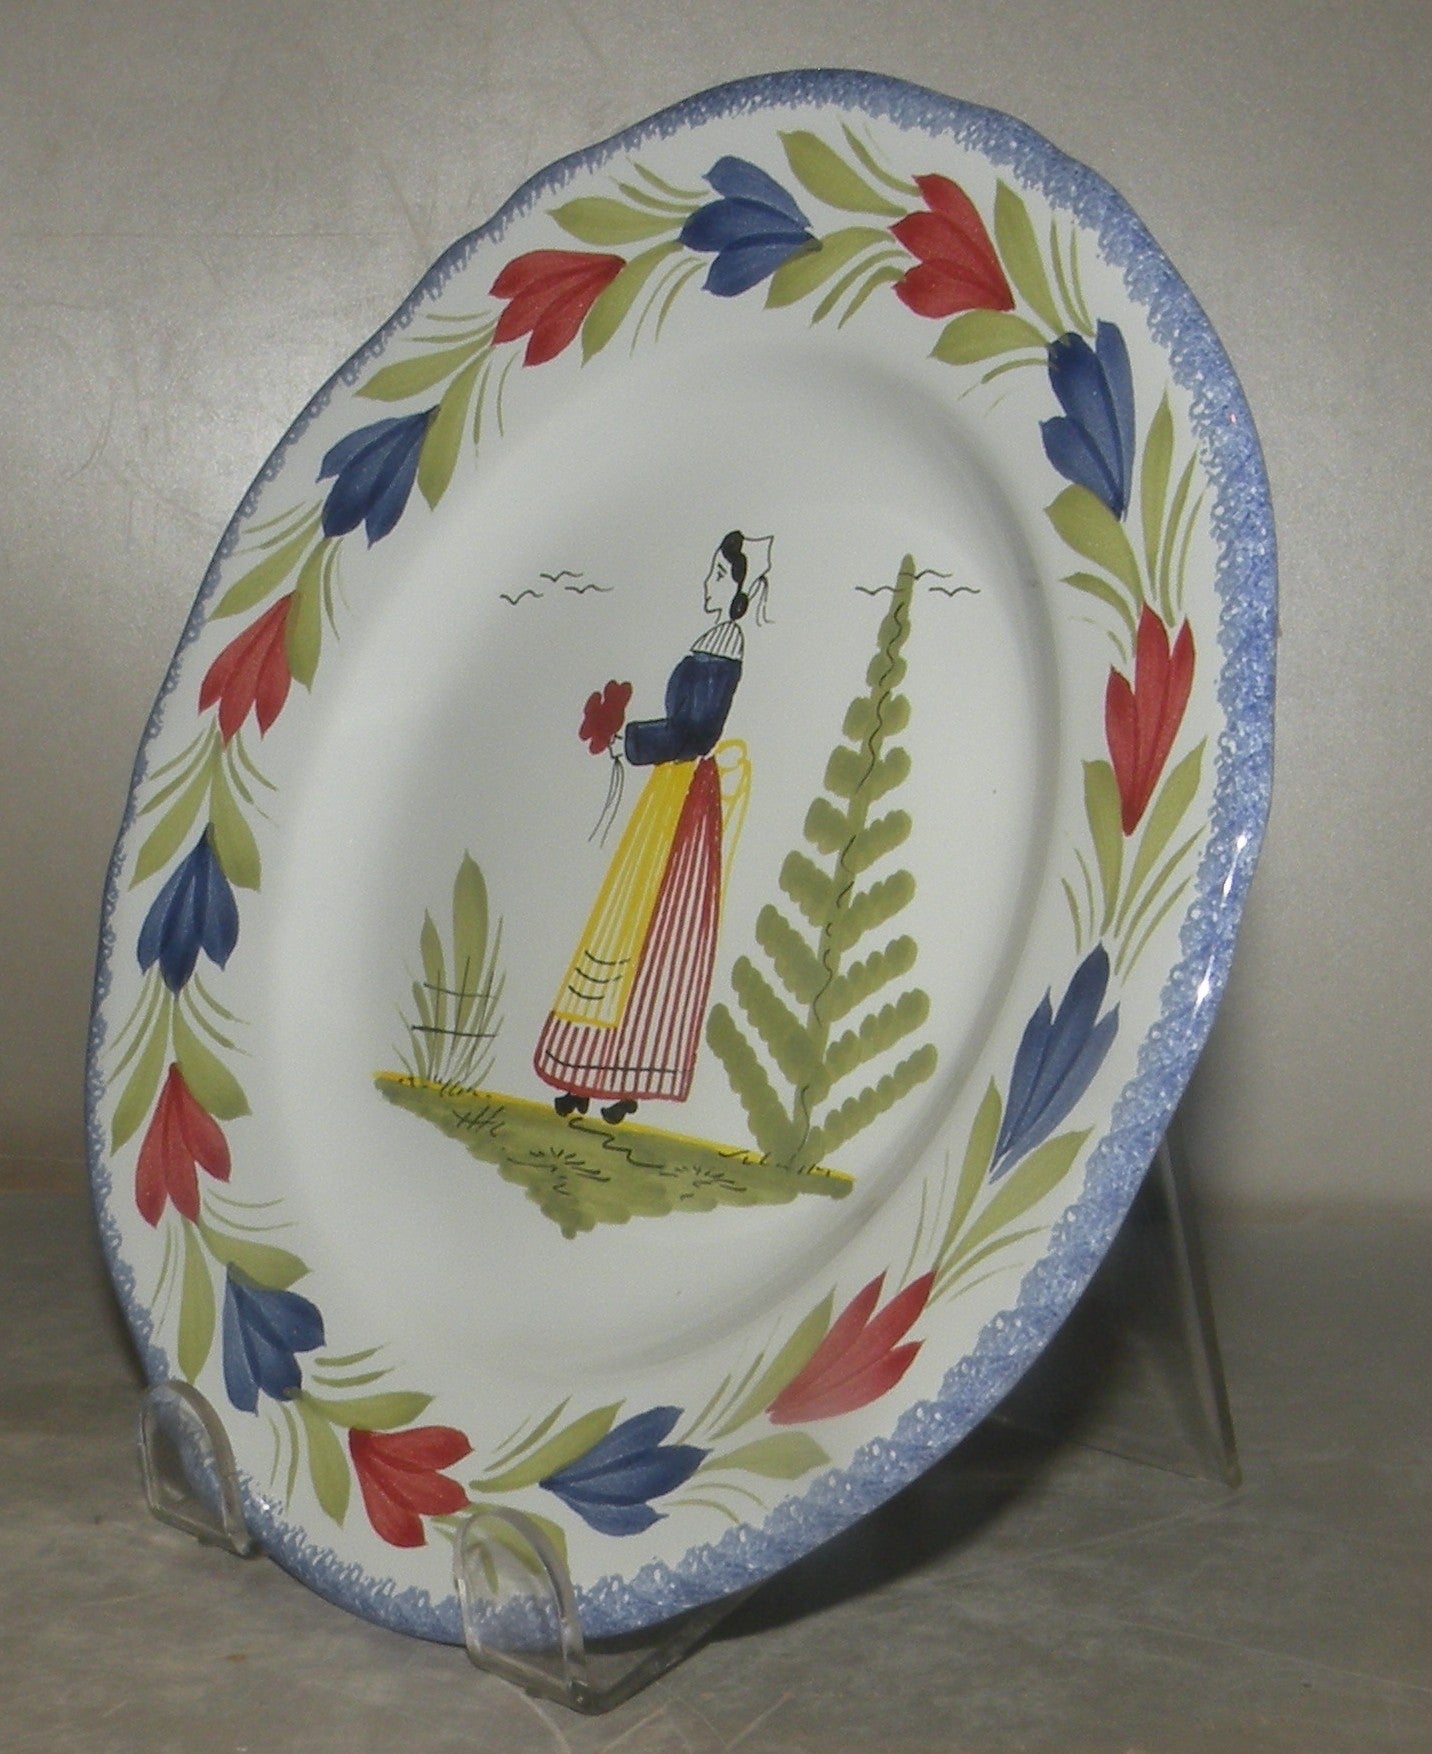 Scalopped Bread & Butter Plate with Lady Mistral Blue